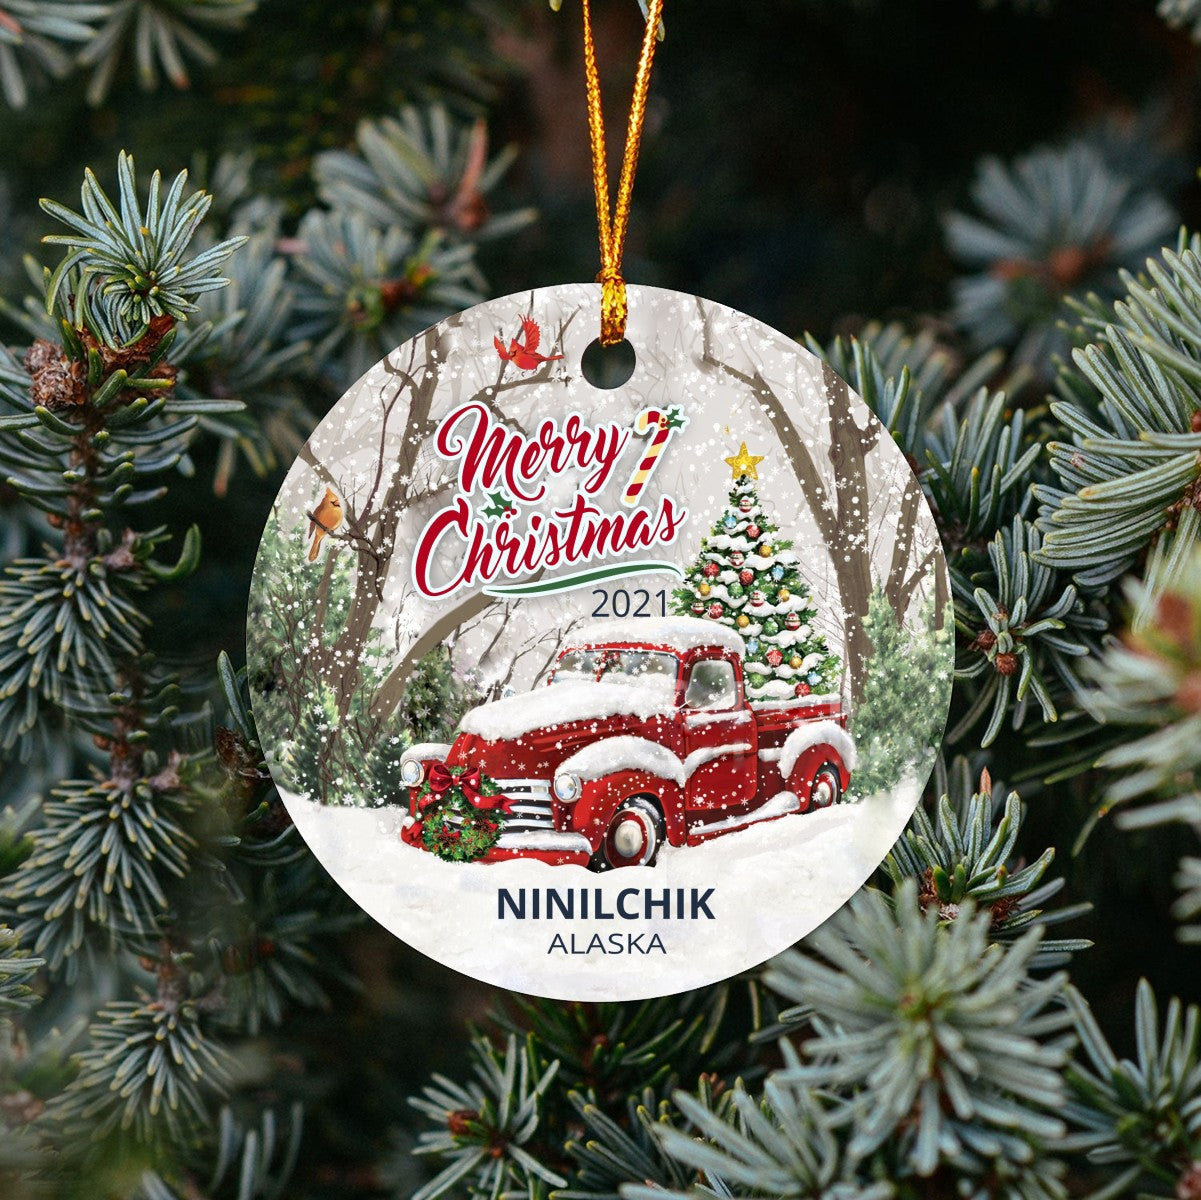 Christmas Tree Ornaments Ninilchik - Ornament With Name City, State Ninilchik Alaska AK Ornament - Red Truck Xmas Ornaments 3'' Plastic Gift For Family, Friend And Housewarming